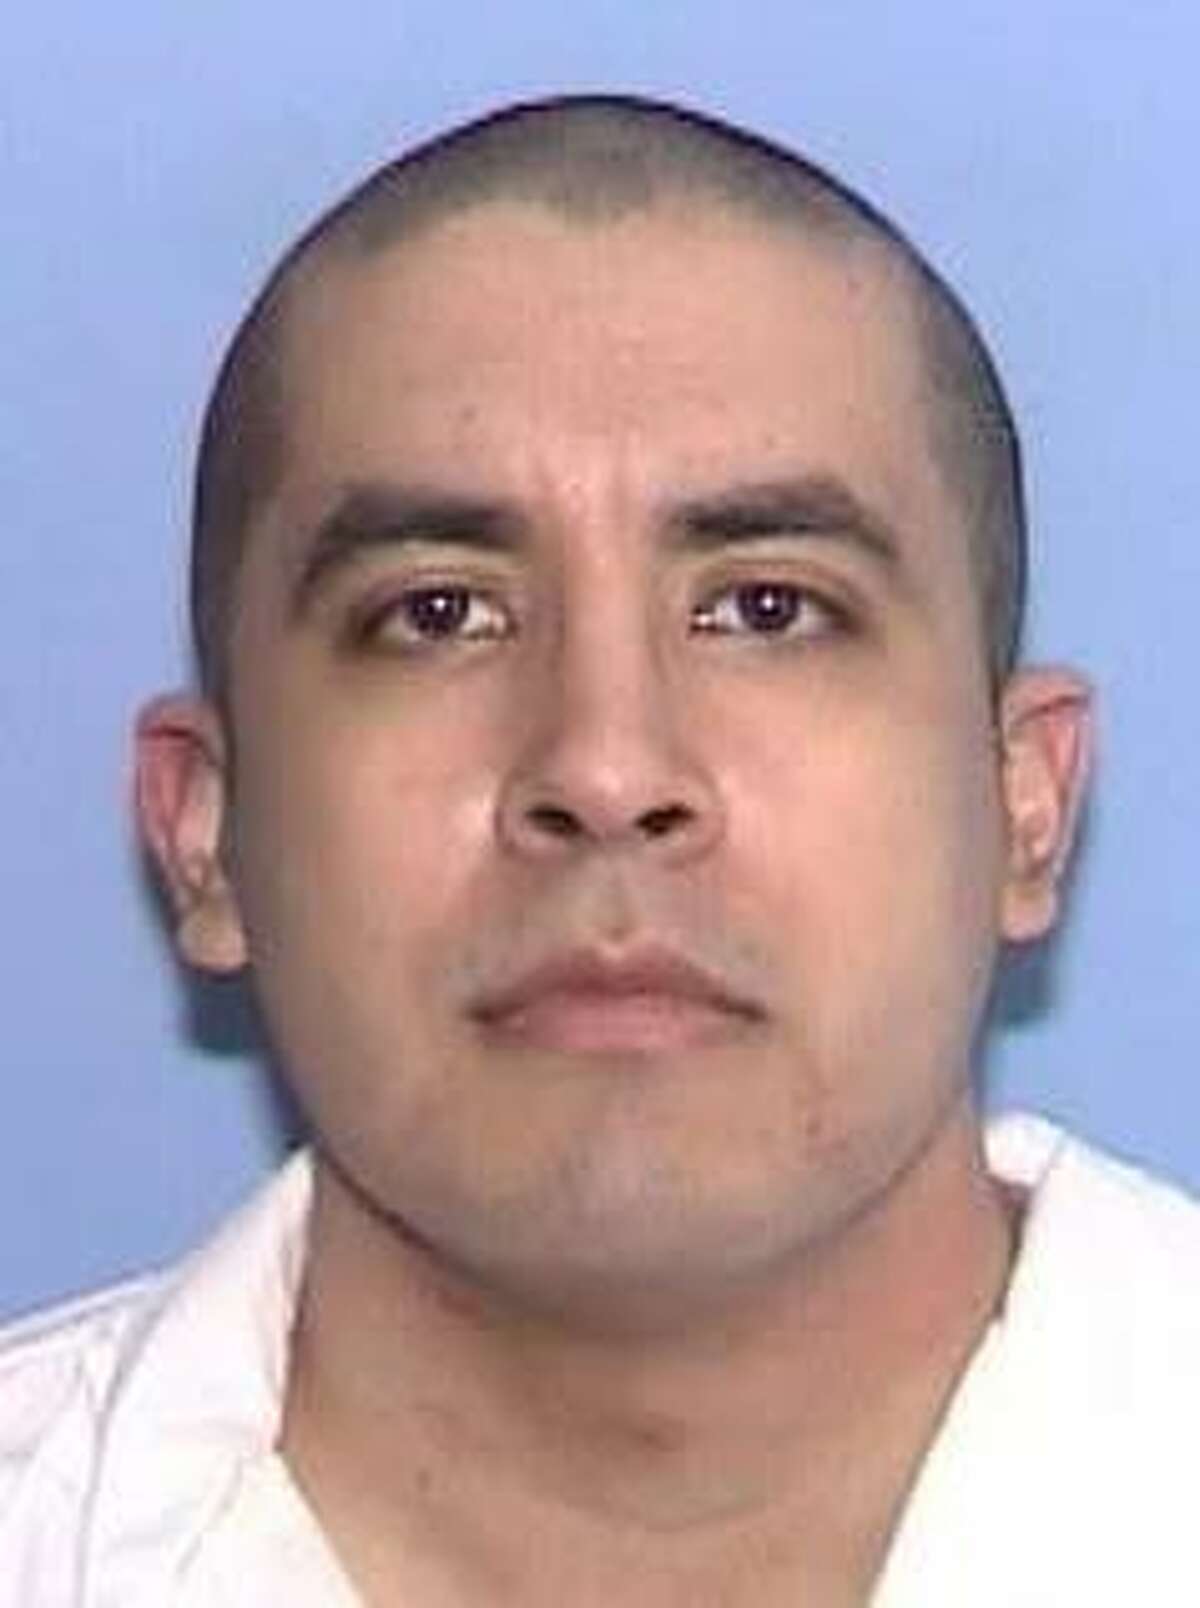 Rosendo Rodriguez III killed Summer Baldwin, 29, in 2005 while visiting Lubbock for training.